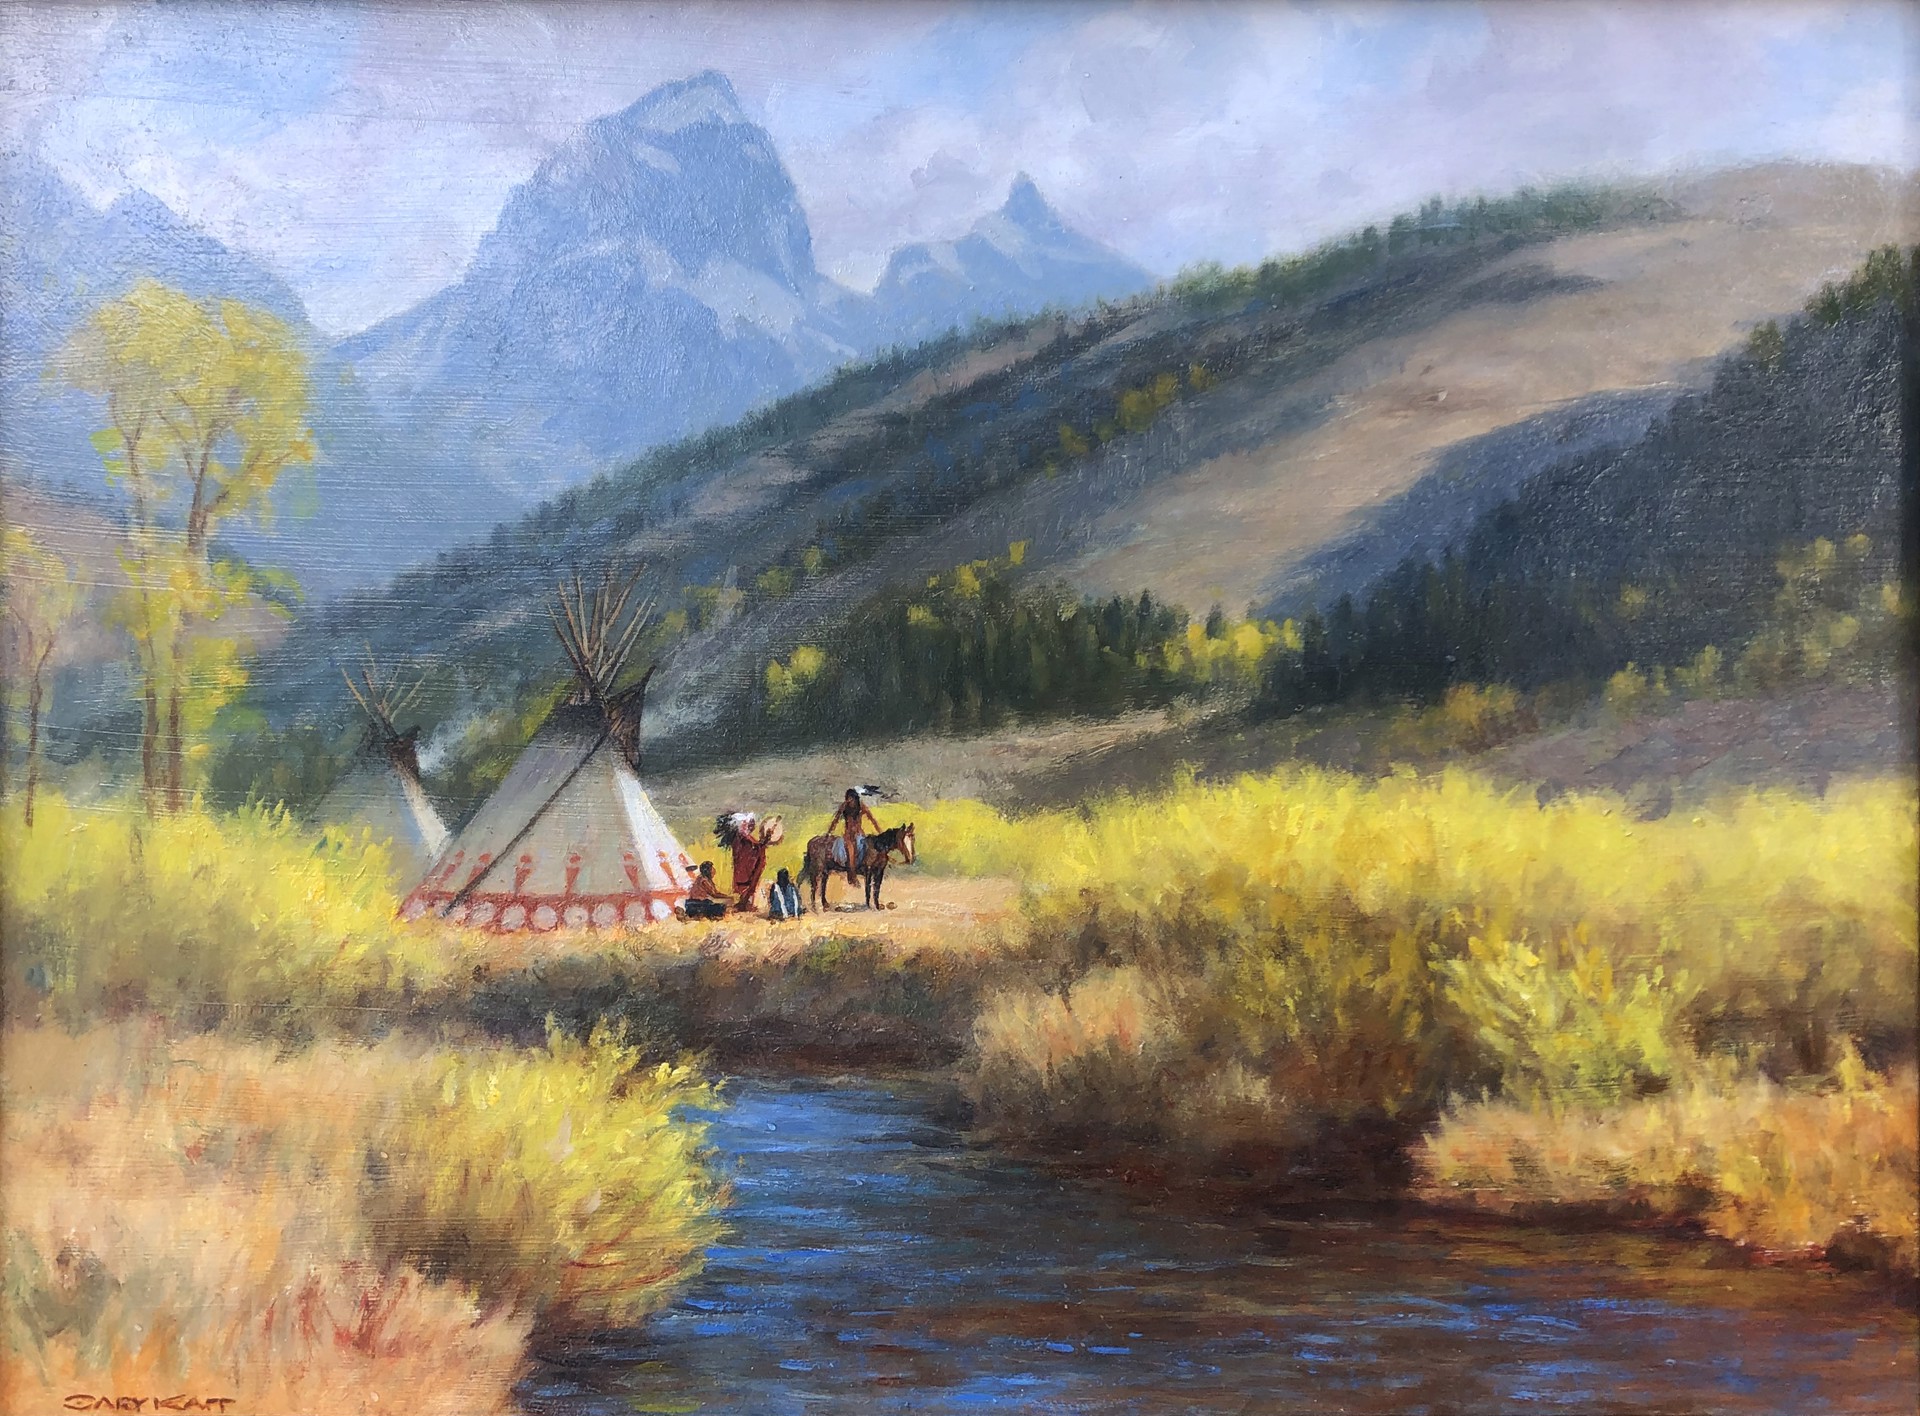 Shoshone in the Valley by Gary Kapp